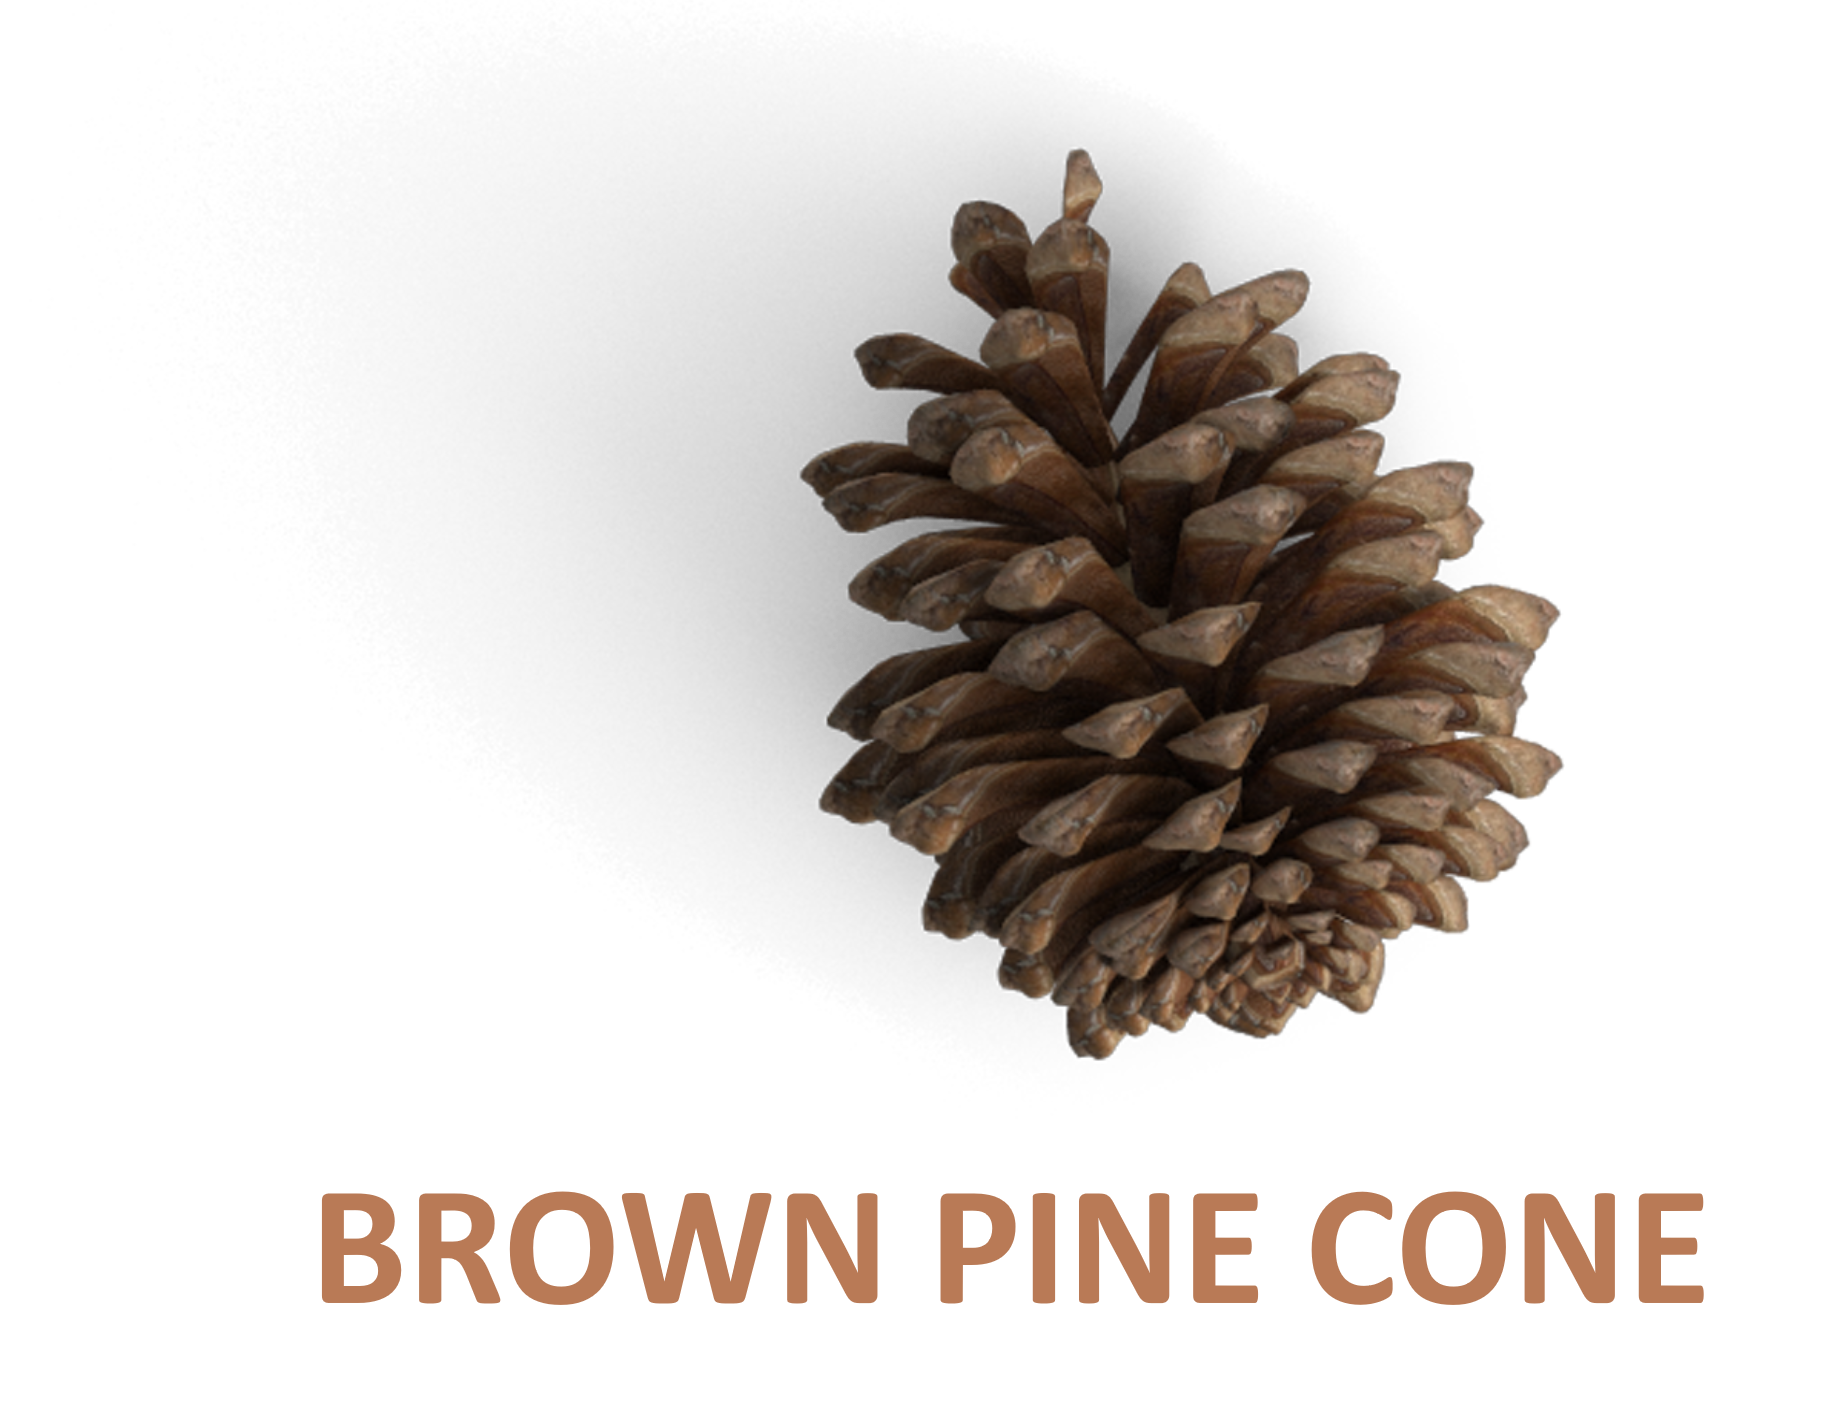 BrownPineCone